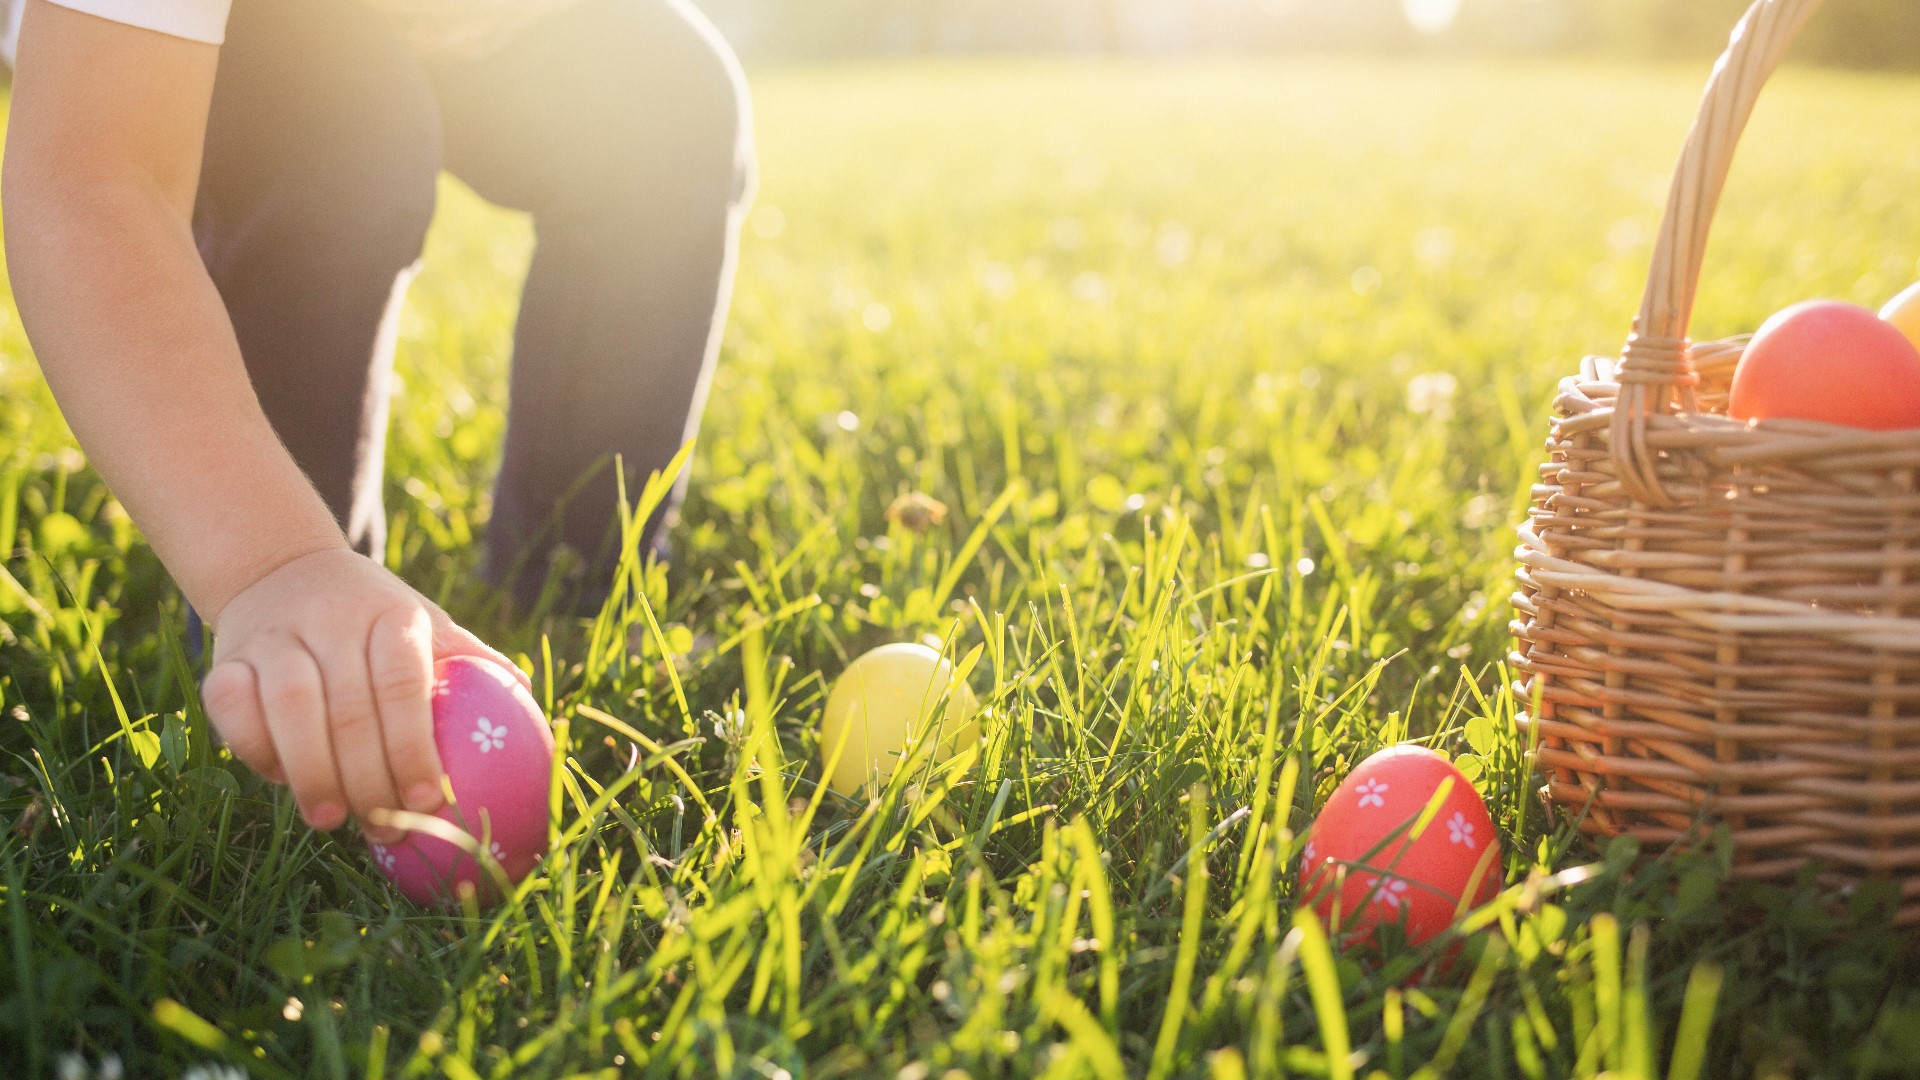 Midland and Odessa will both be holding an egg hunt leading up to the Easter holiday.